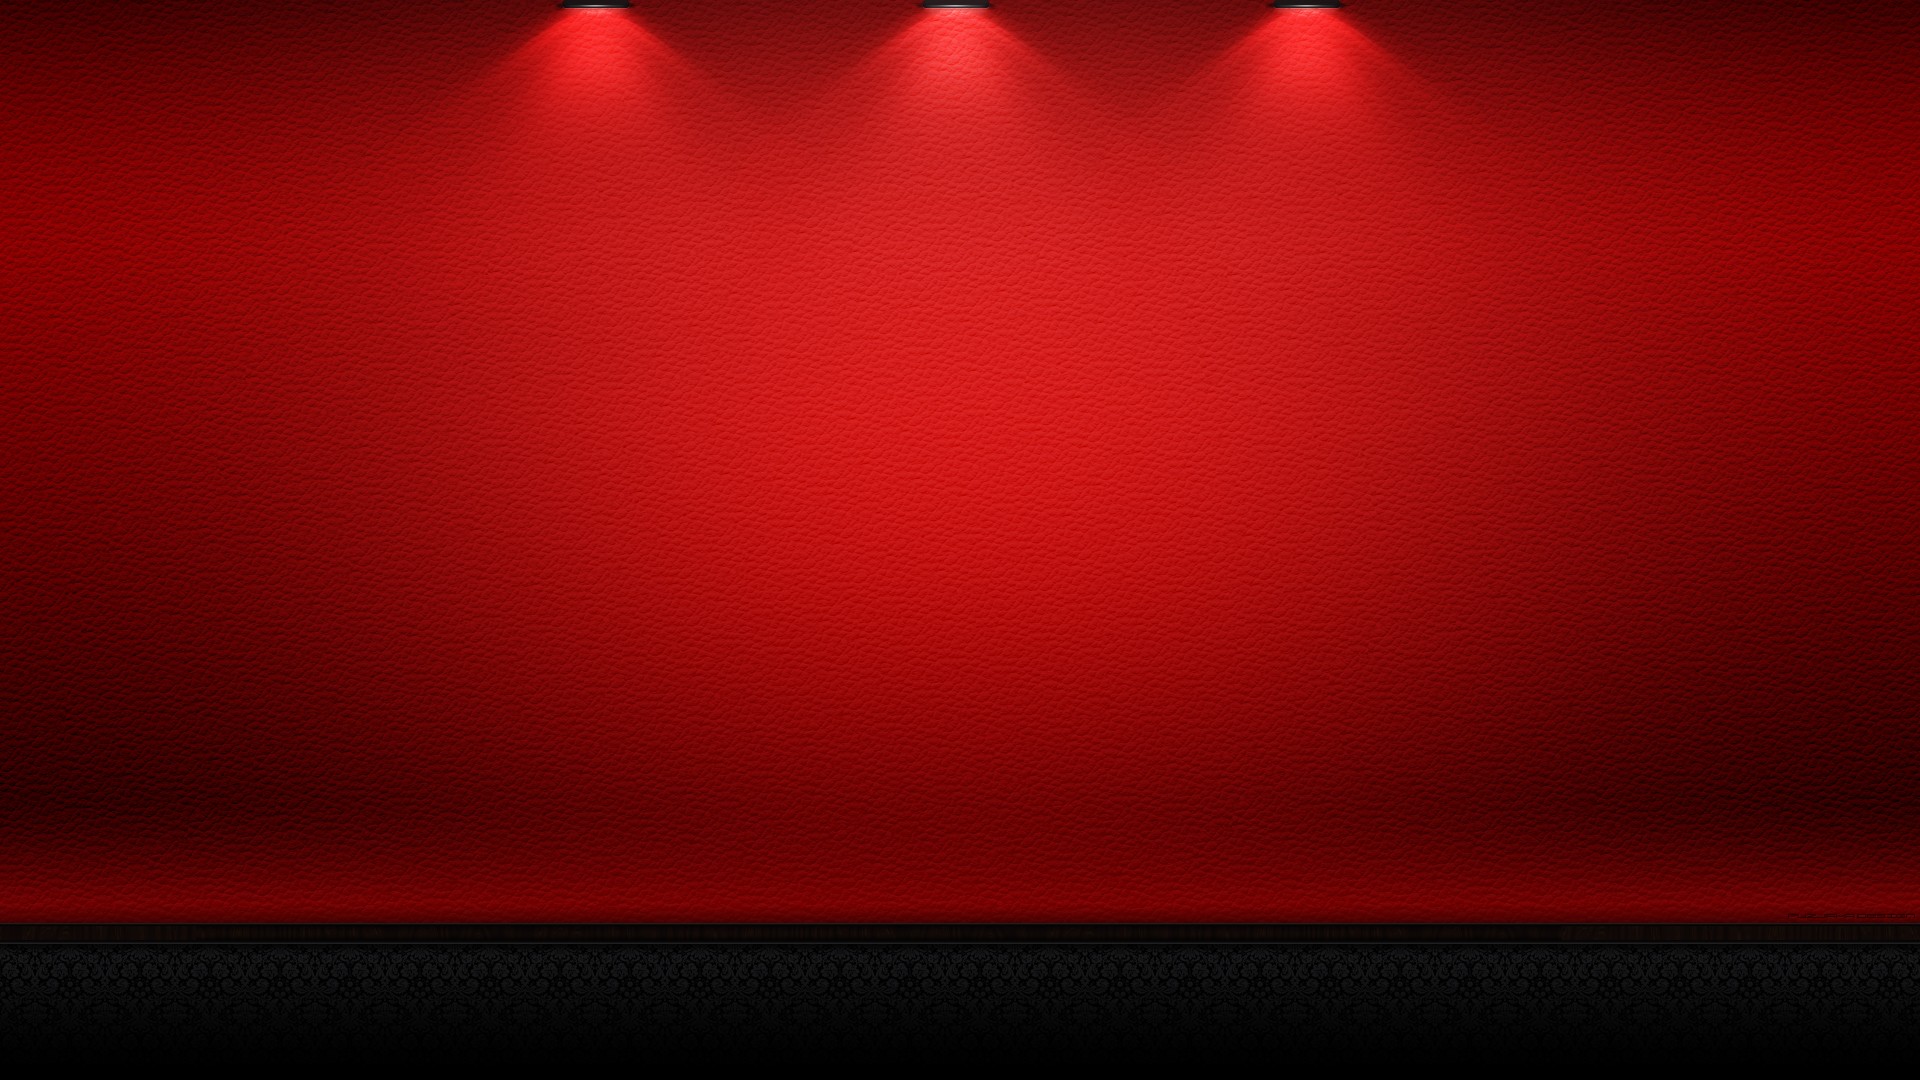 66+] Red Background Pictures - WallpaperSafari